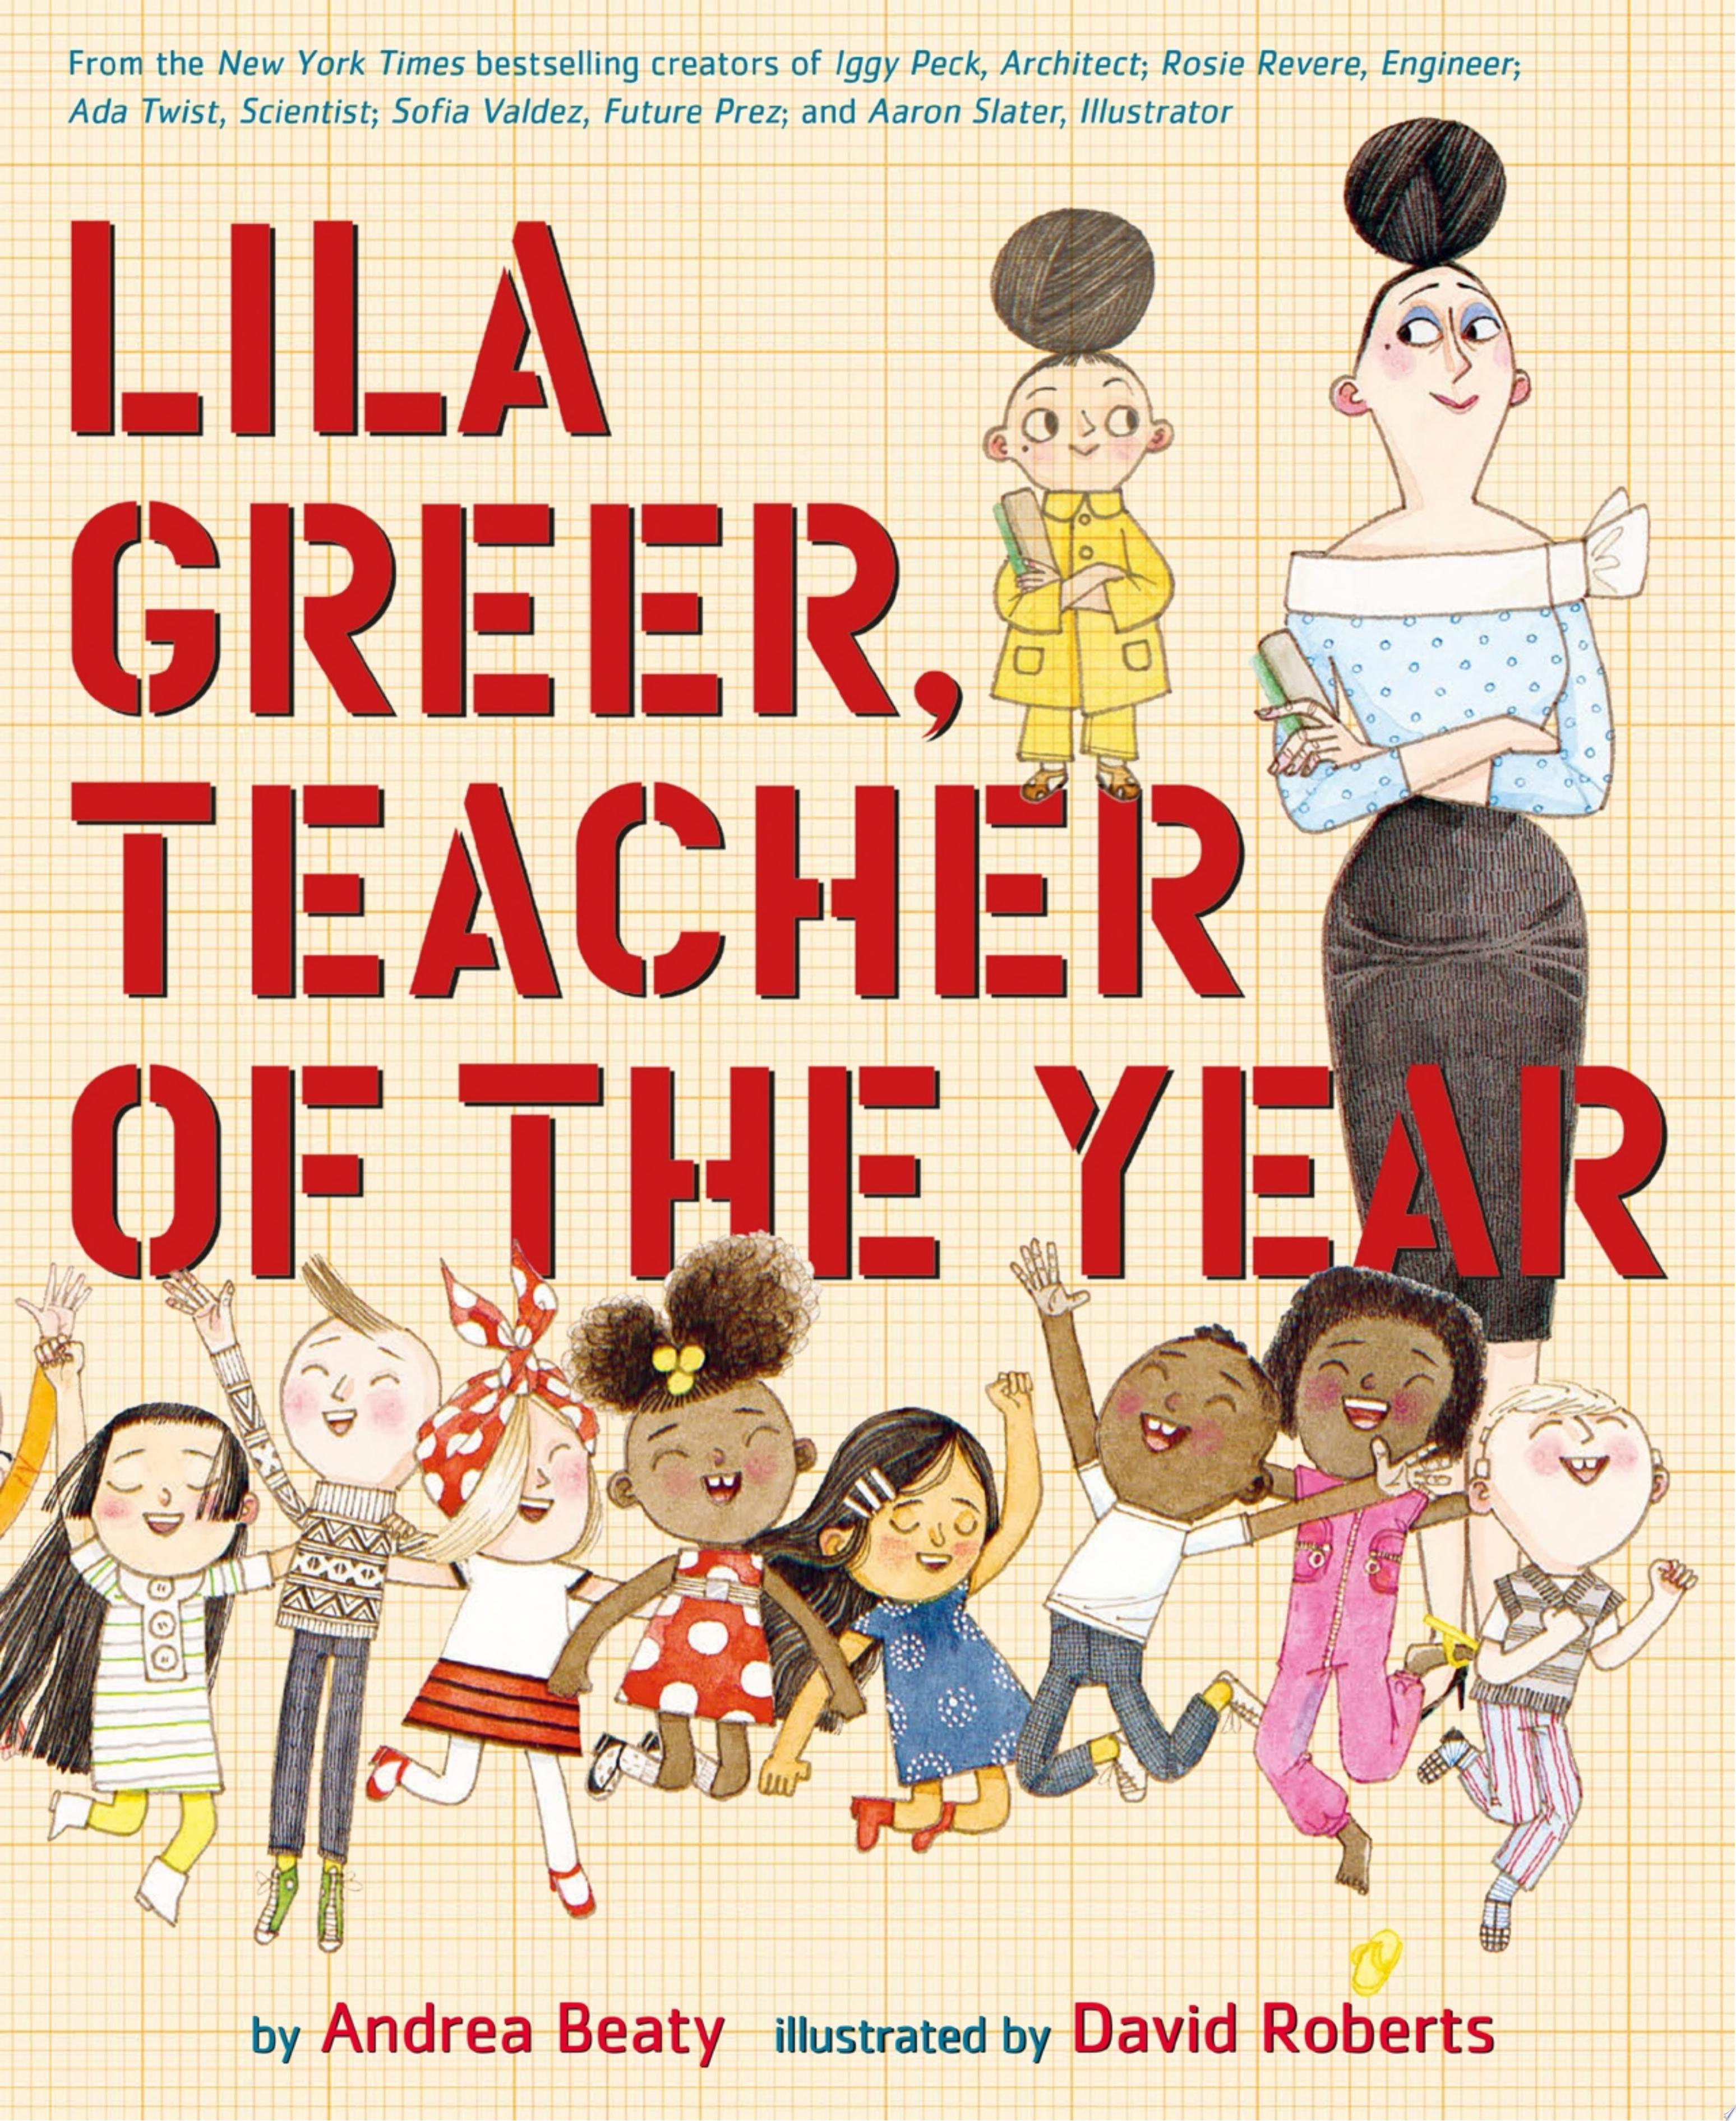 Image for "Lila Greer, Teacher of the Year"